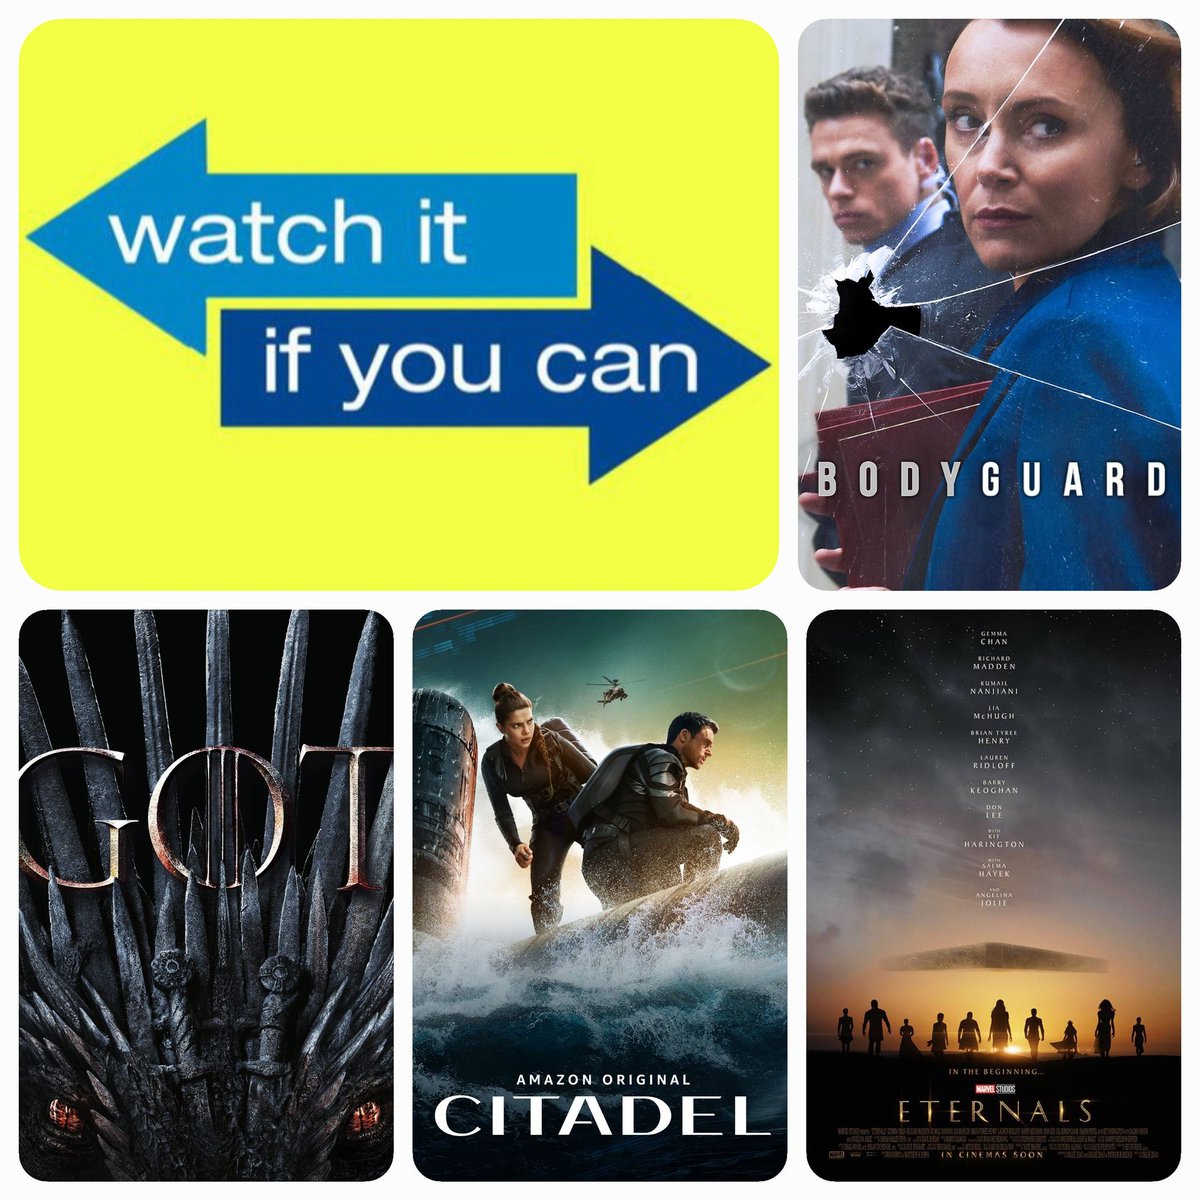 Some of our favourite movies/tv shows featuring Richard Madden. 

Any you haven't seen? Then maybe...
just maybe #watchitifyoucan